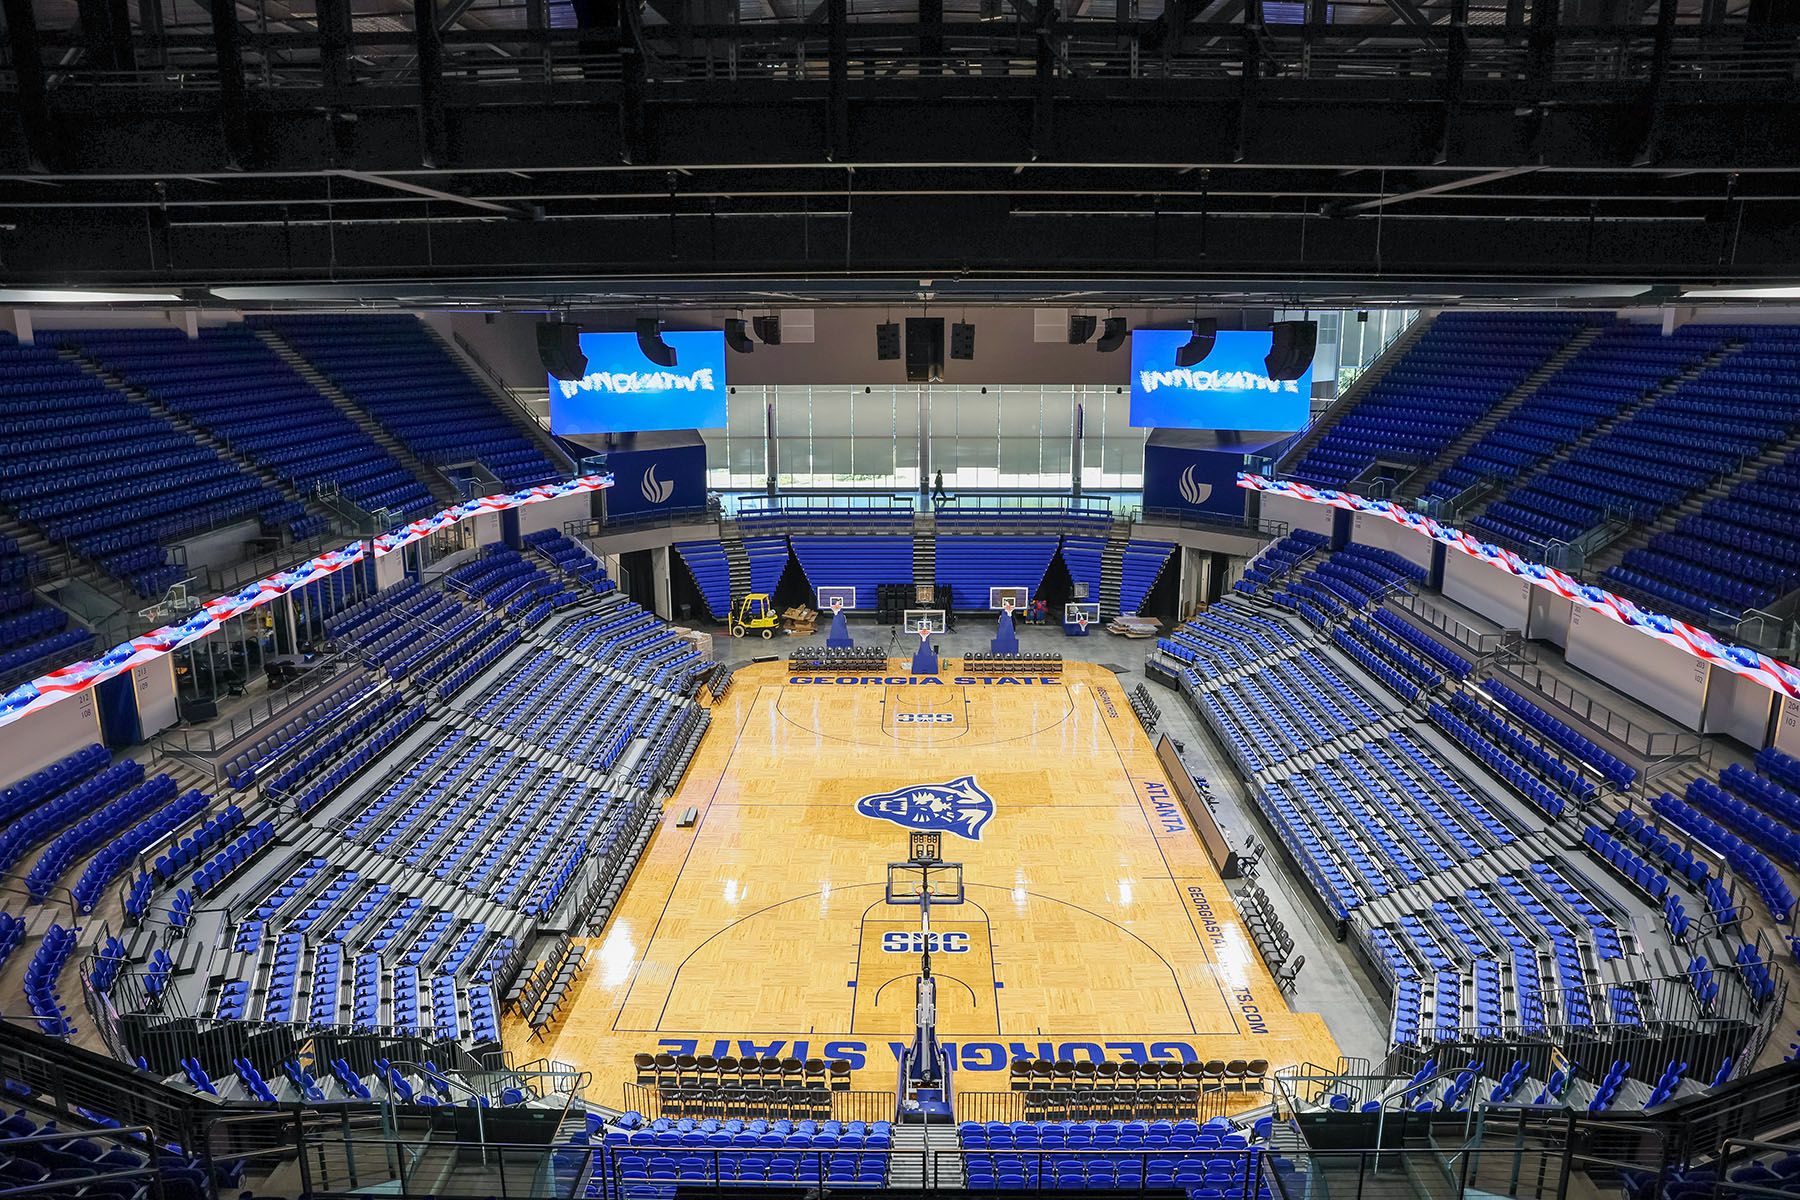 L-Acoustics A15i Offers New GSU Convocation Center a Sound System as Flexible as the Venue Itself featured image